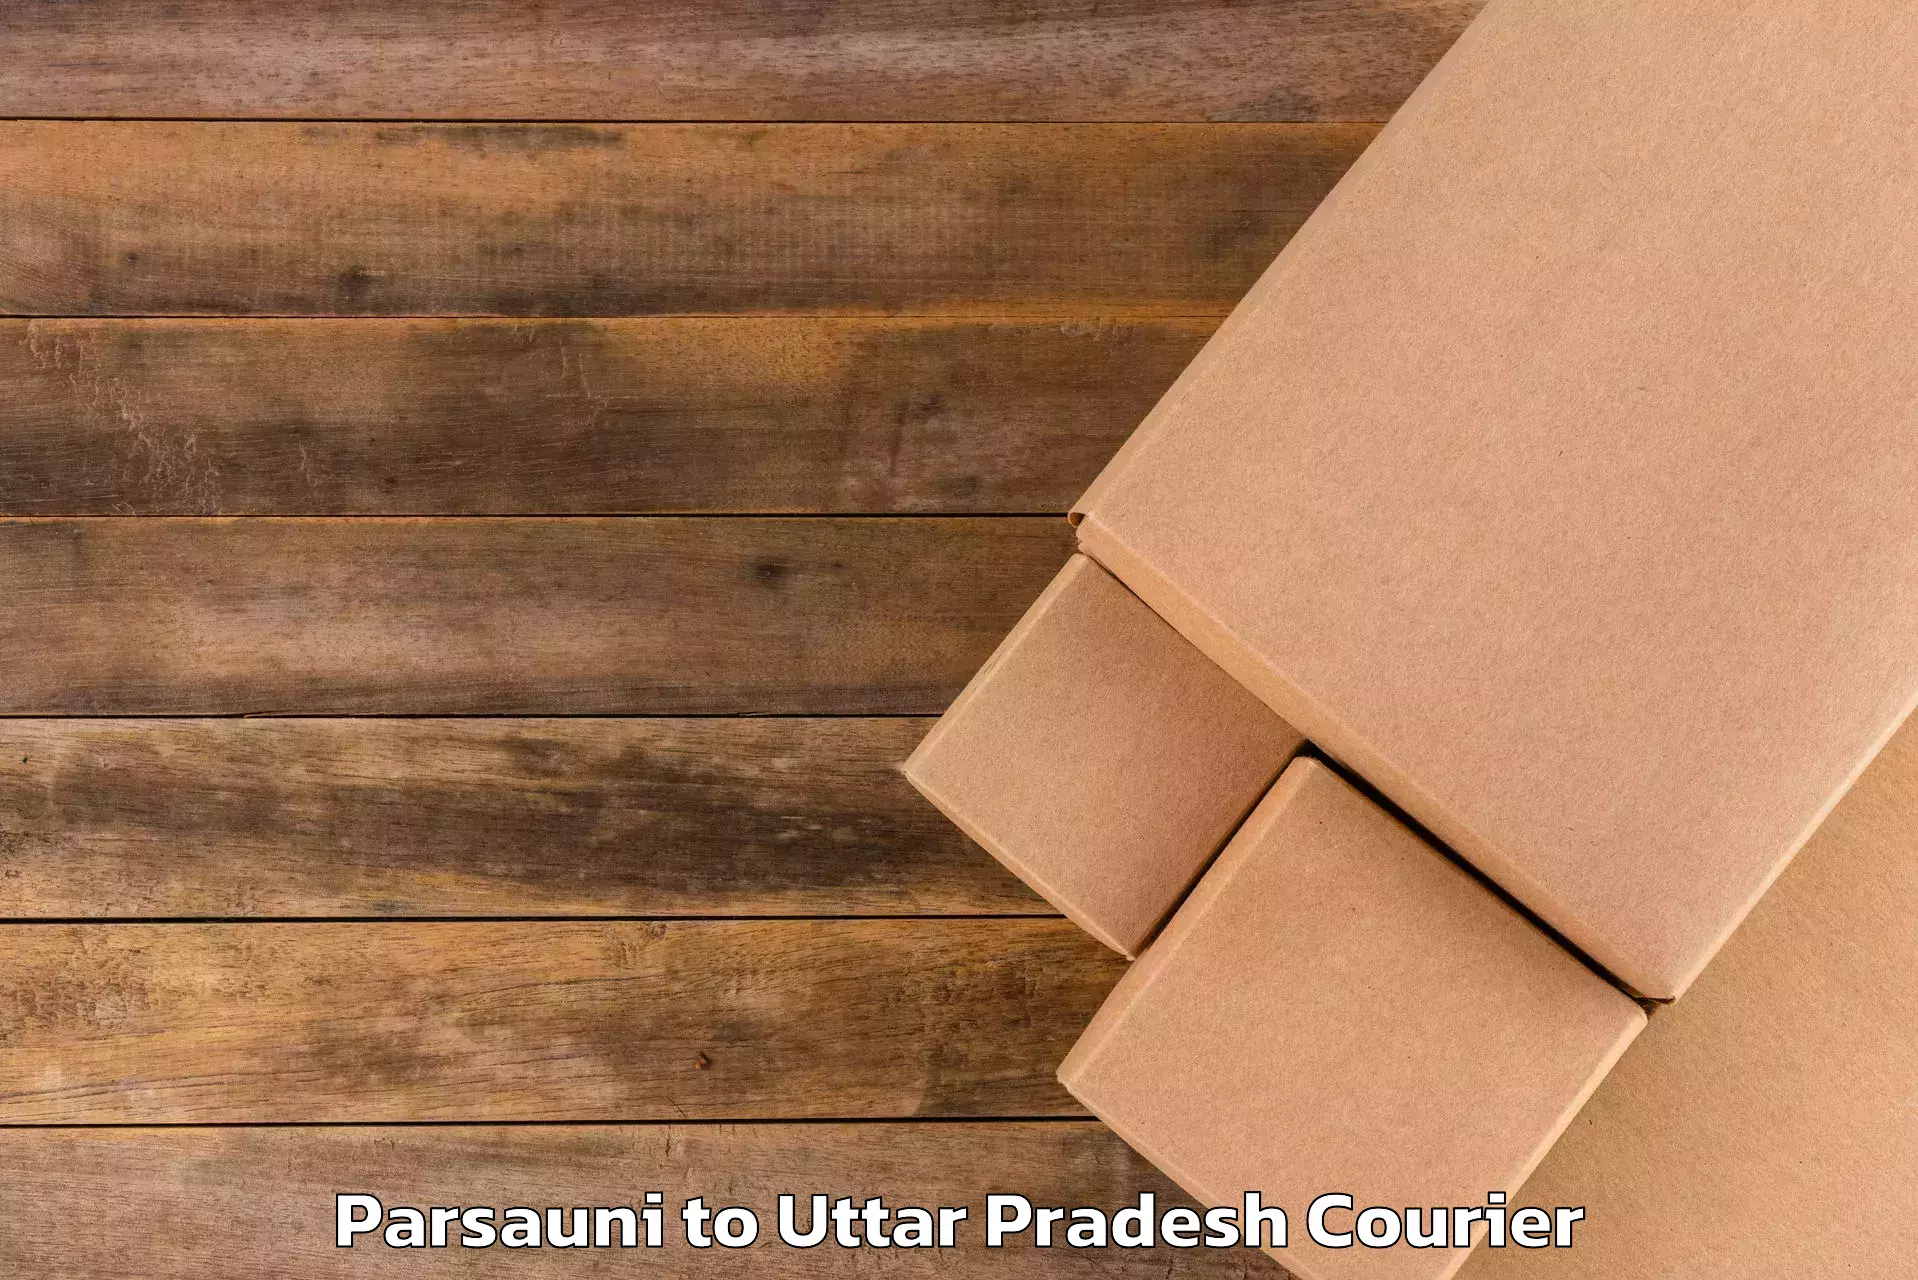 Weekend baggage shipping in Parsauni to Aligarh